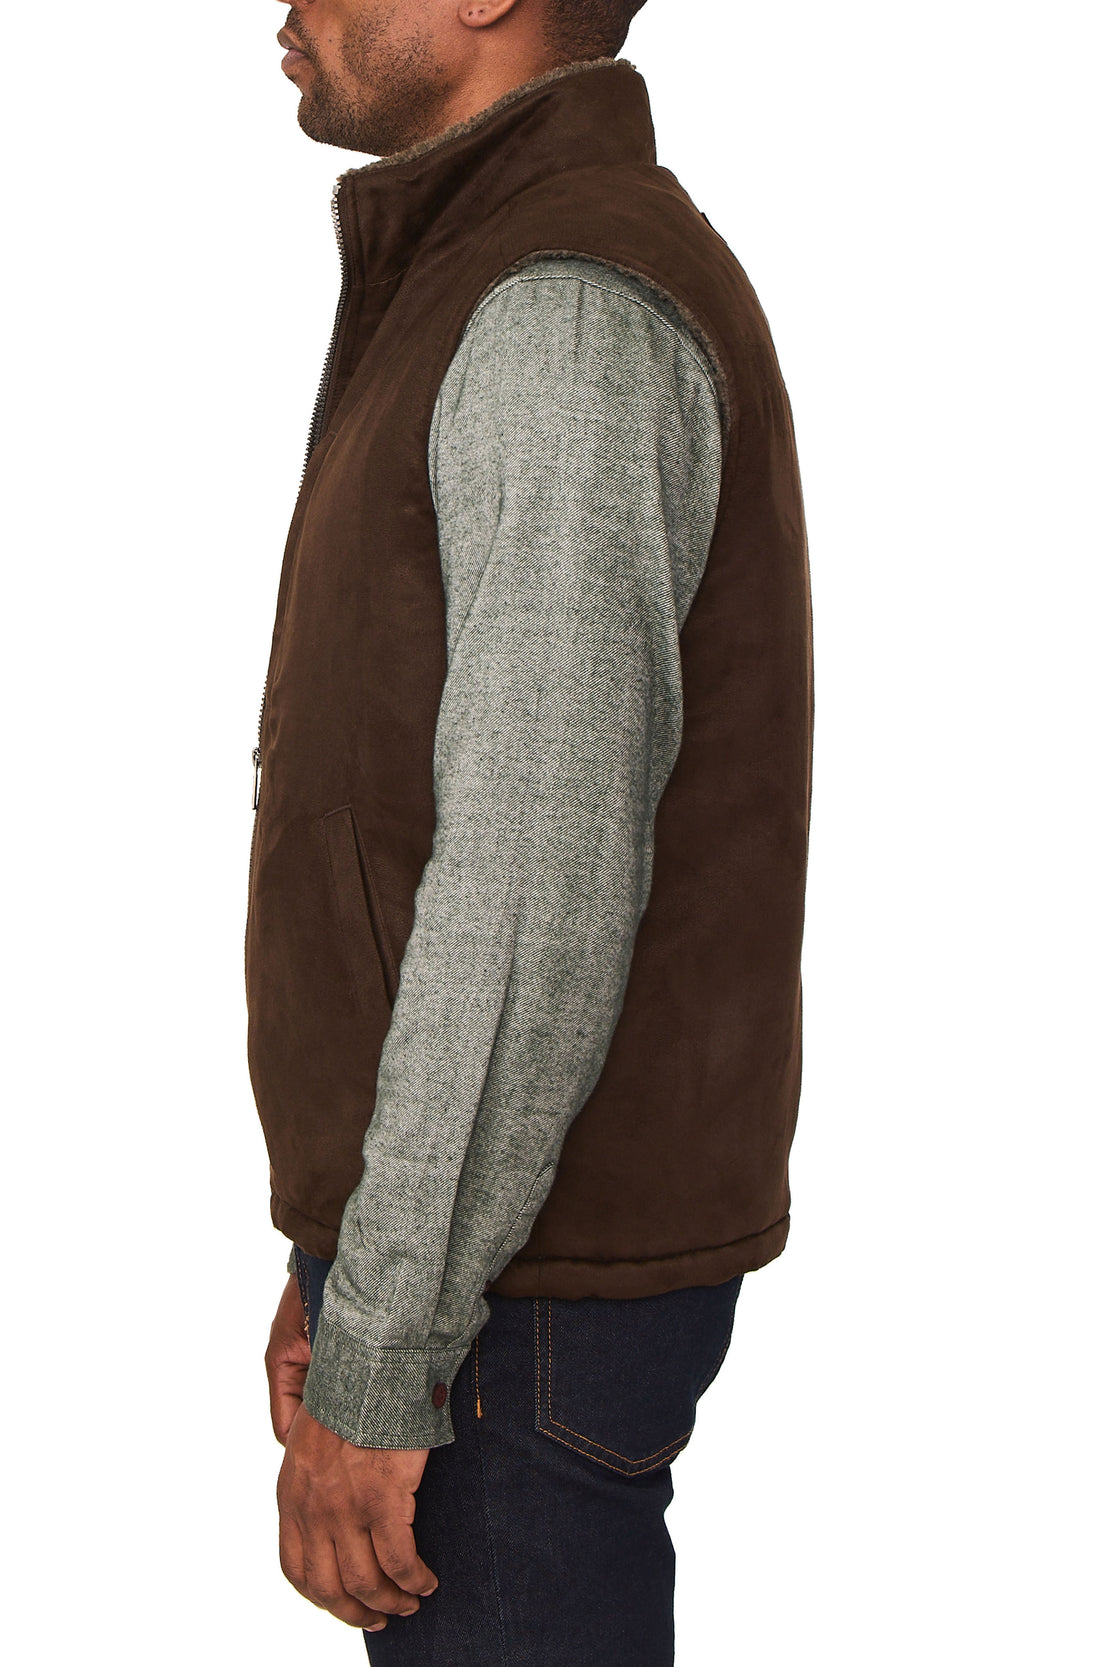 MICRO SUEDE SHERPA LINED VEST